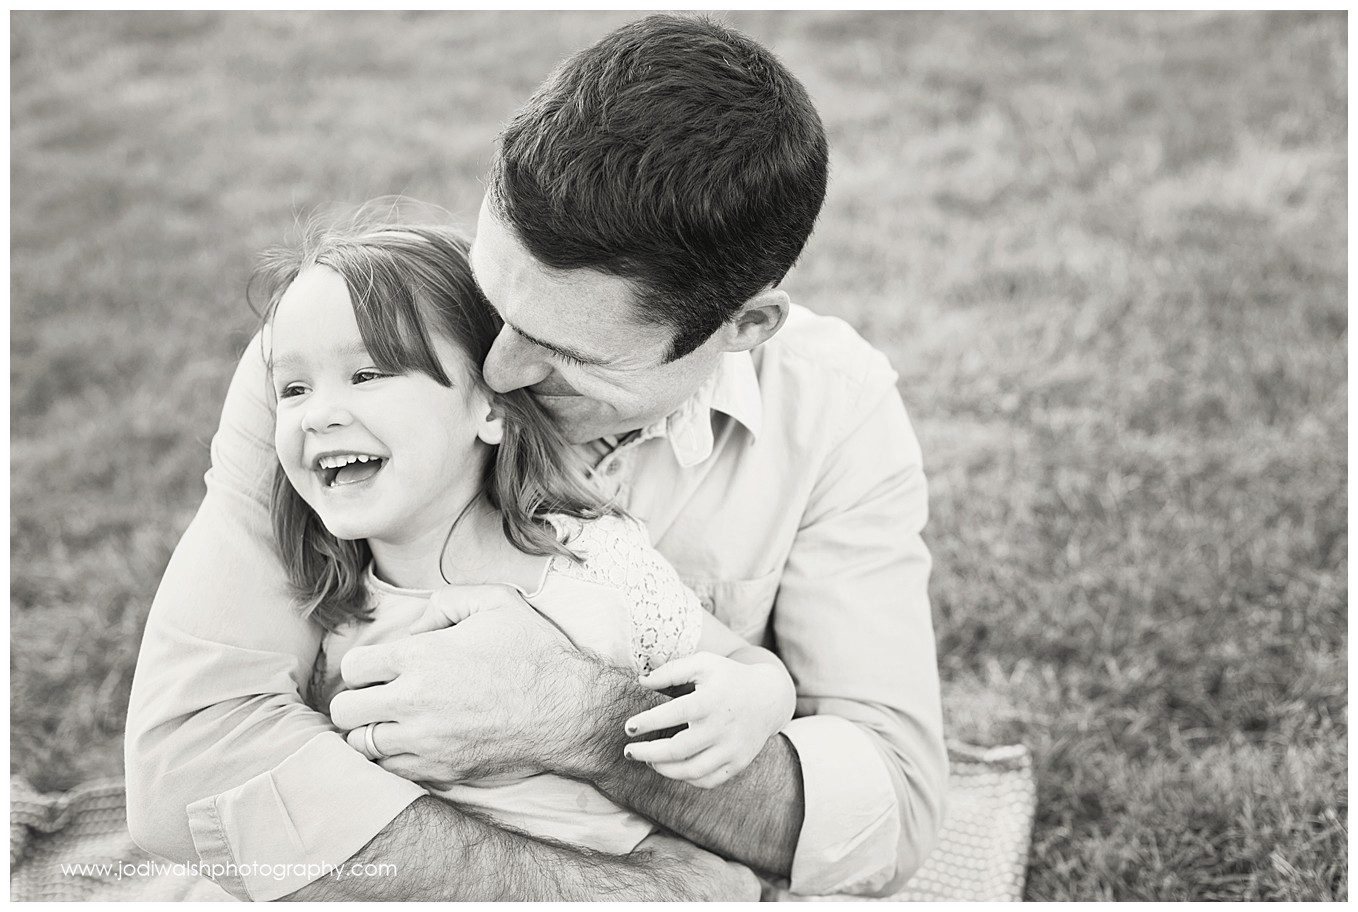 black and white image of a dad hugging his little girl. He's looking down and smiling and she's looking up and grinning.